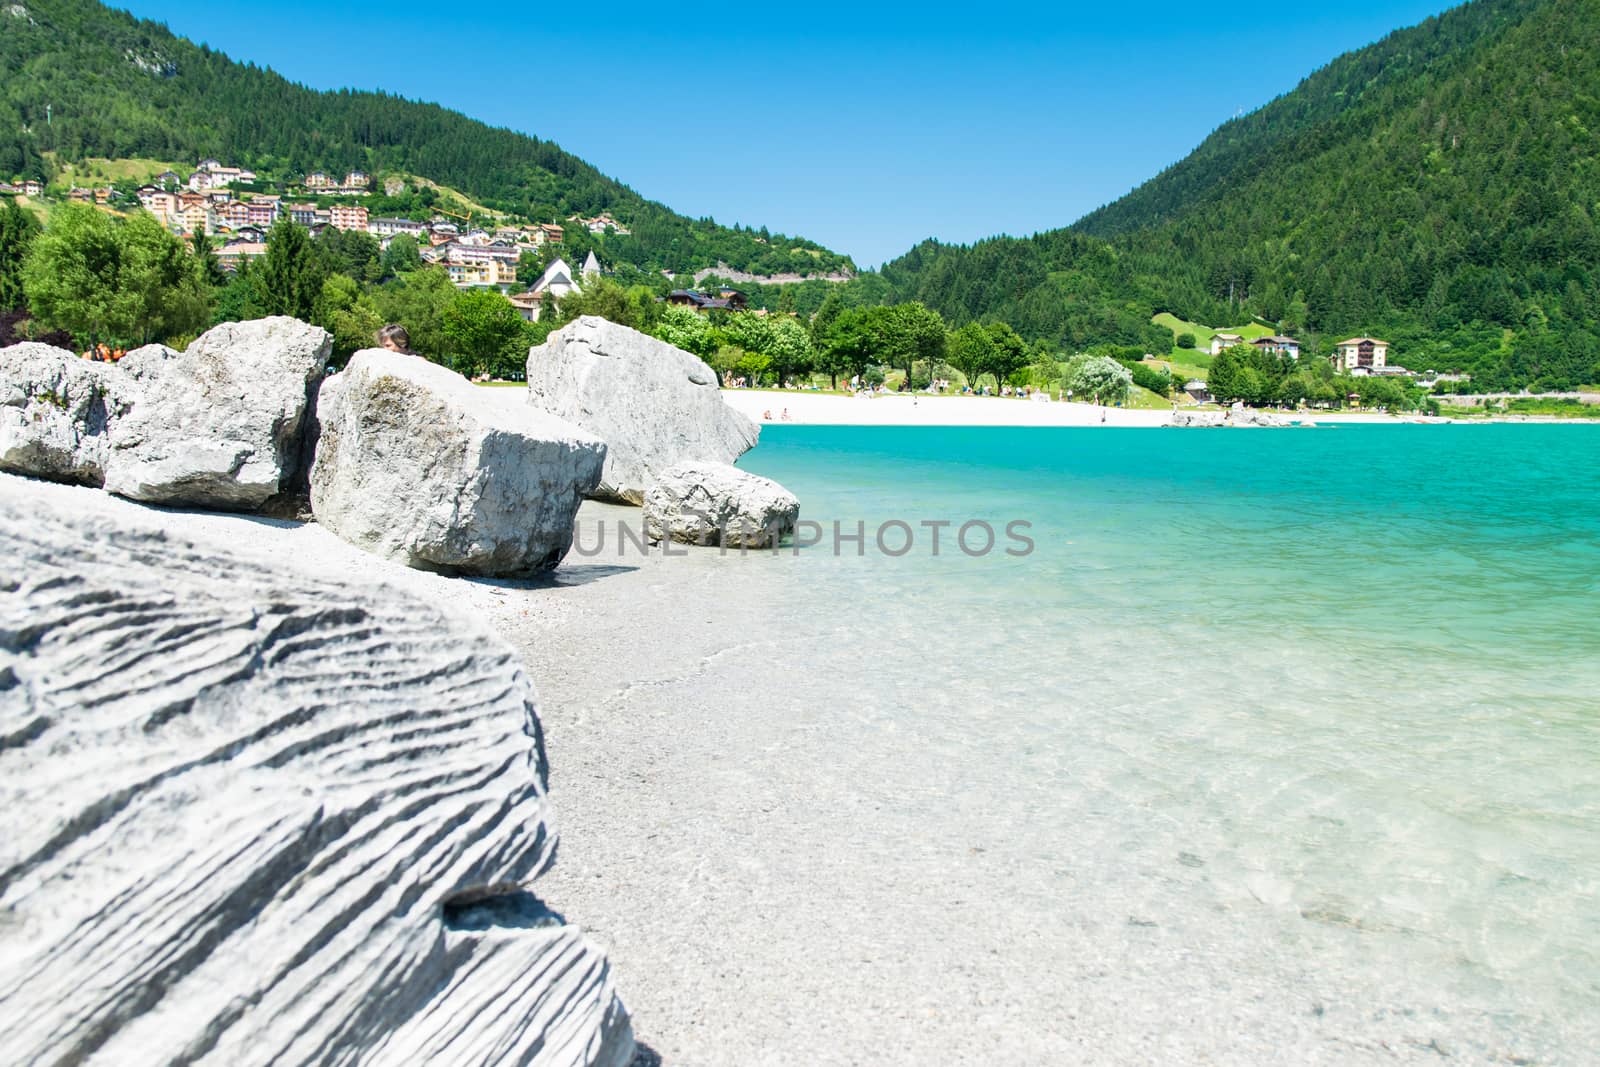 Lake Molveno, elected most beautiful lake in Italy in 2015